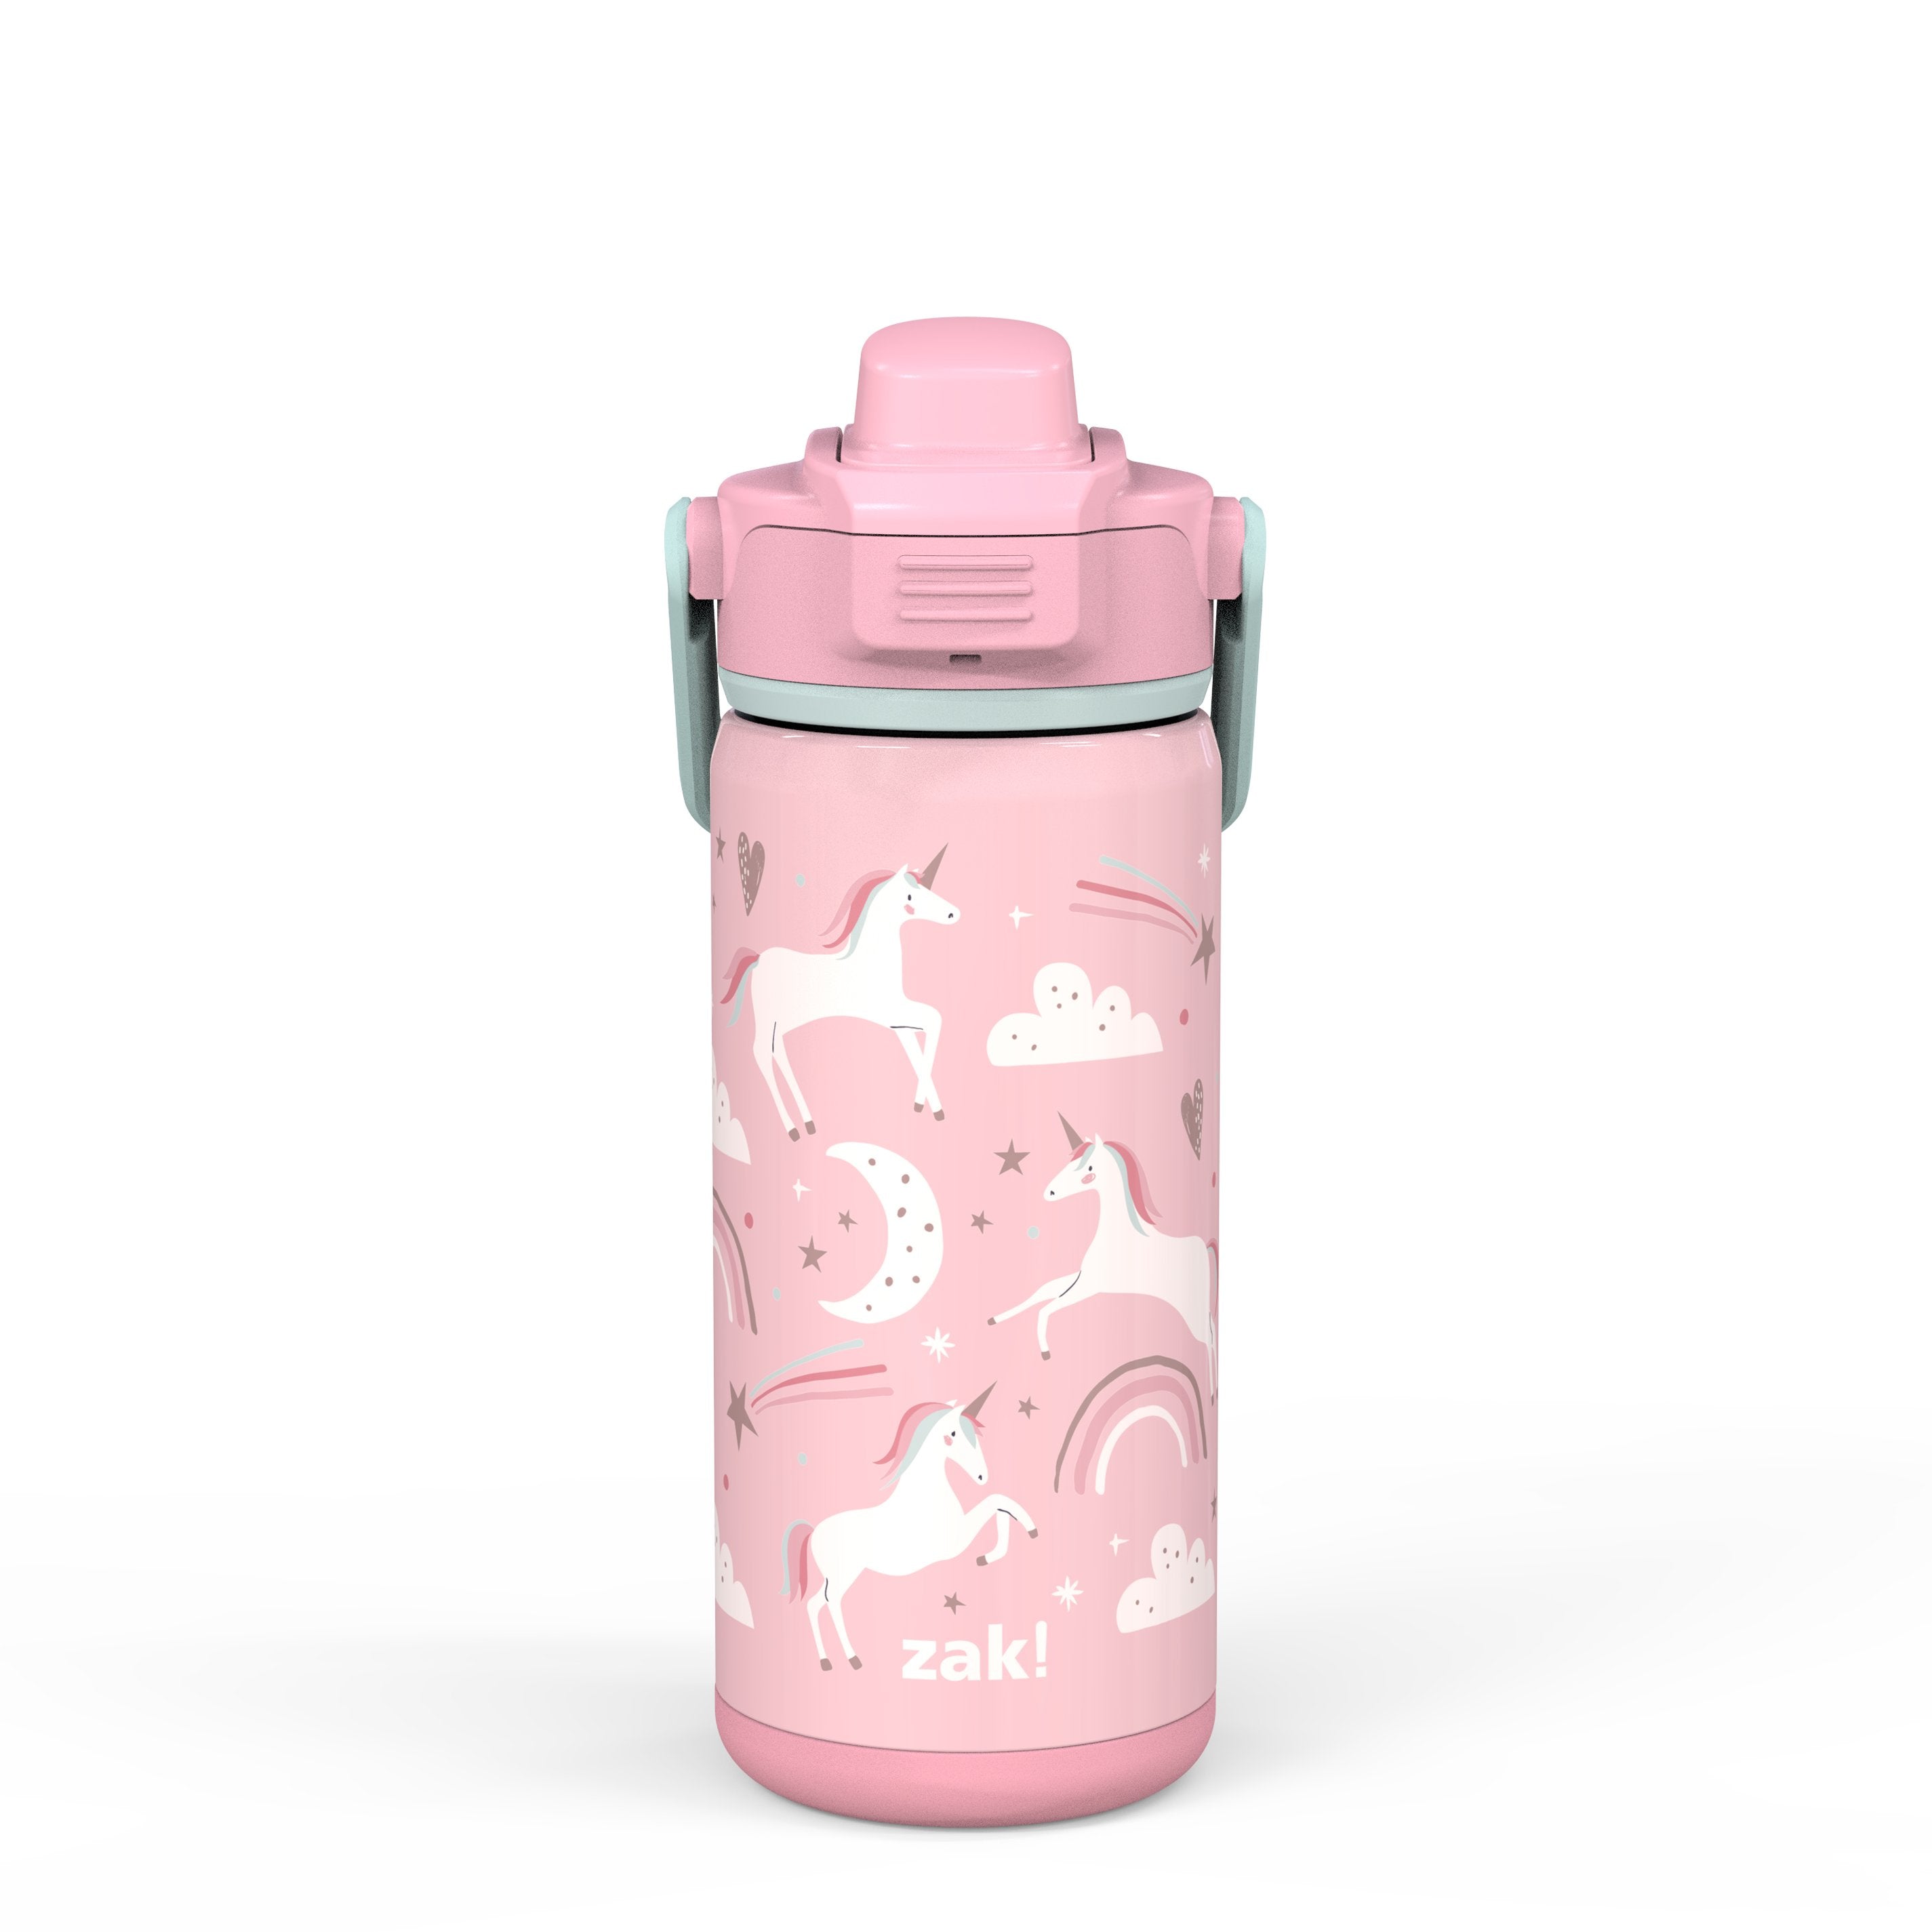 Sprinkles Personalized Vacuum Insulated 14oz Water Bottle